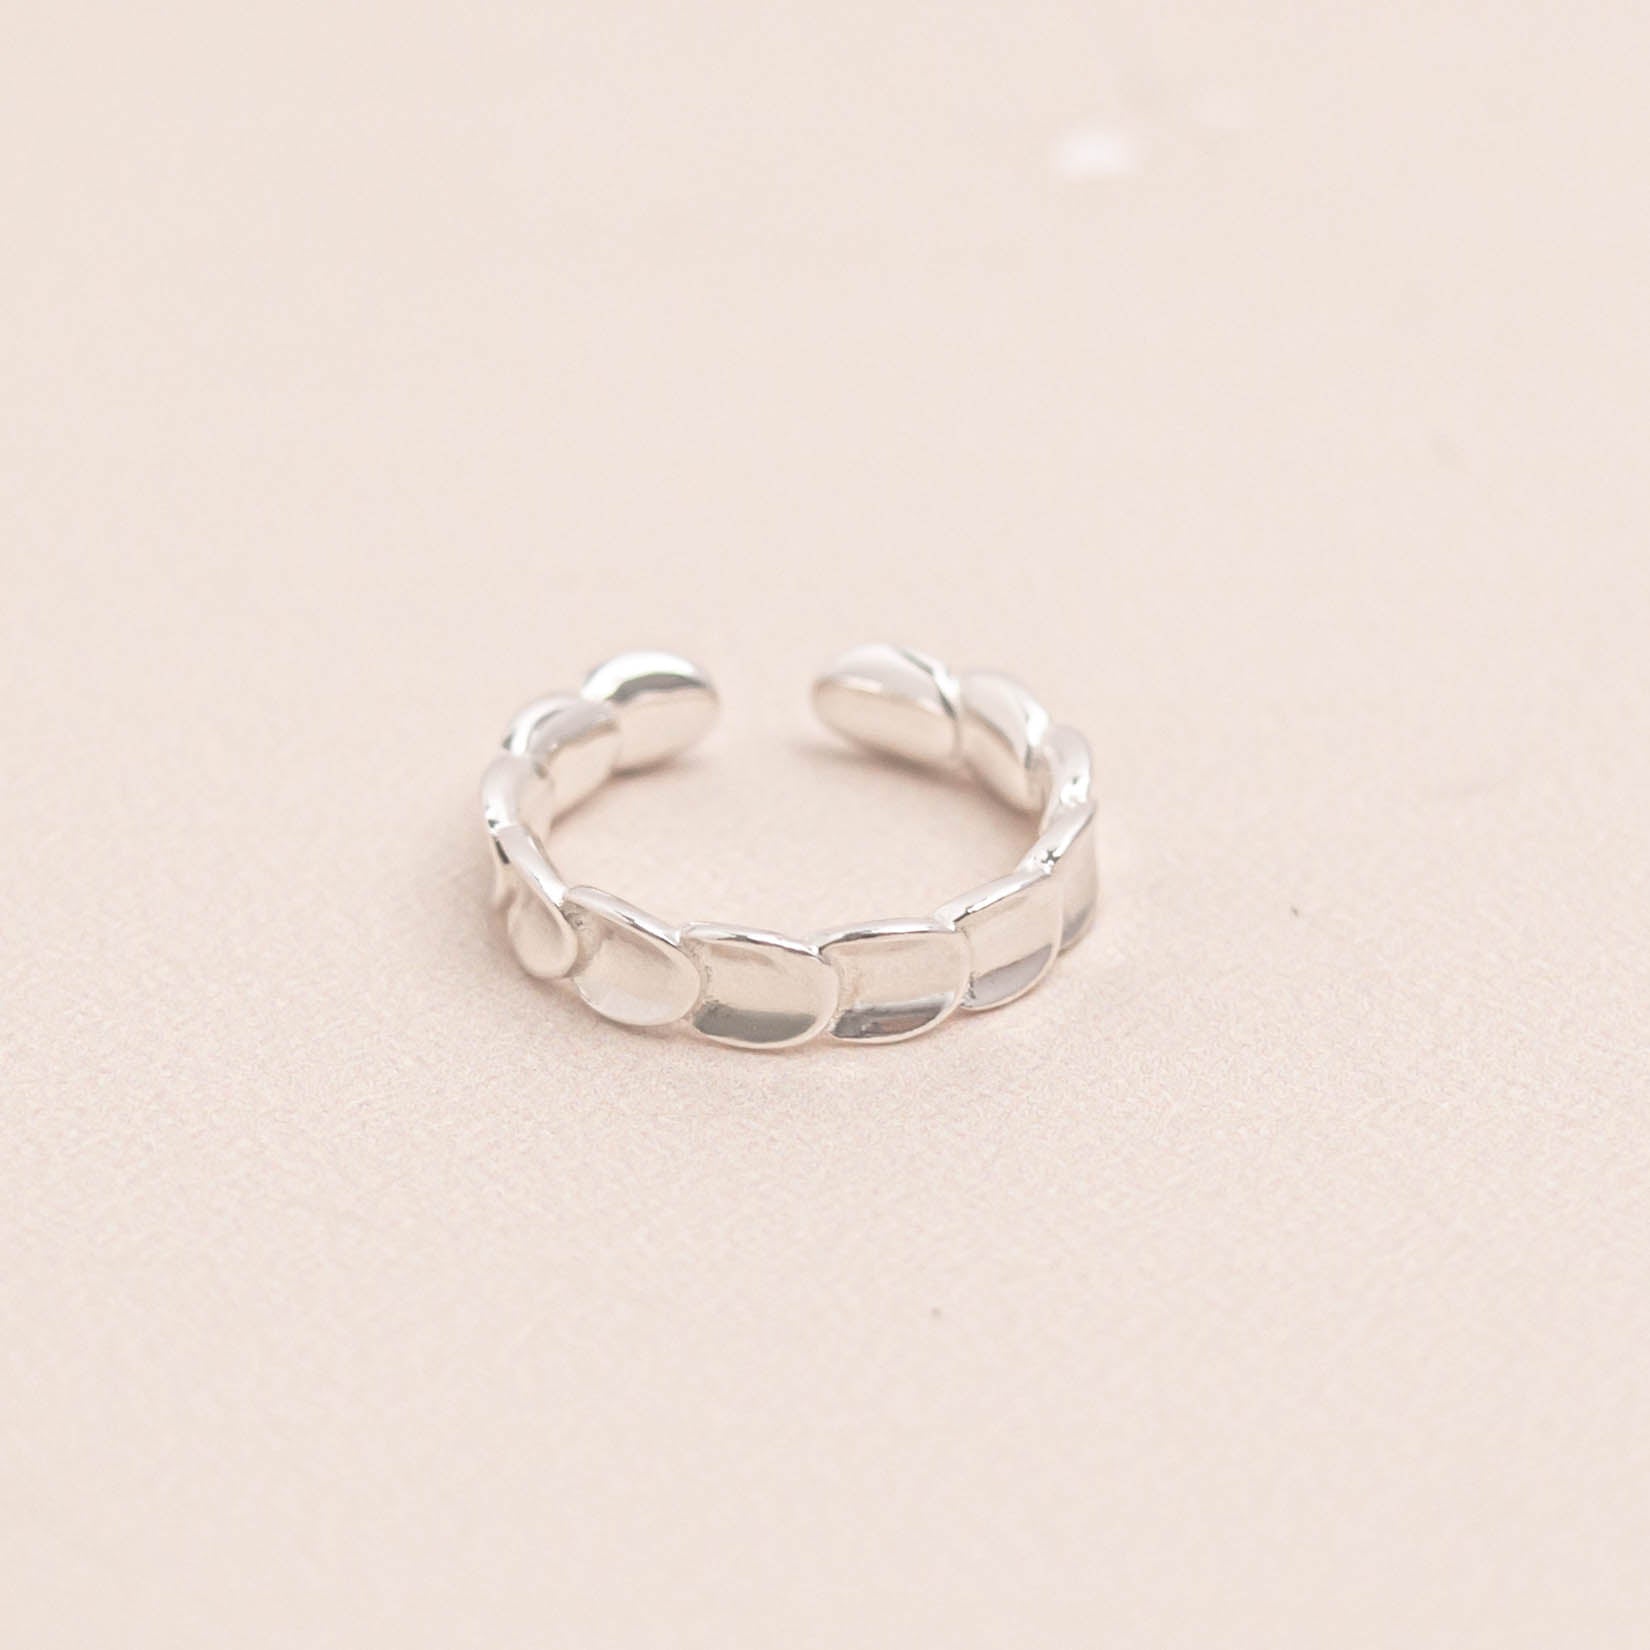 Adjustable Fish Scale Ring